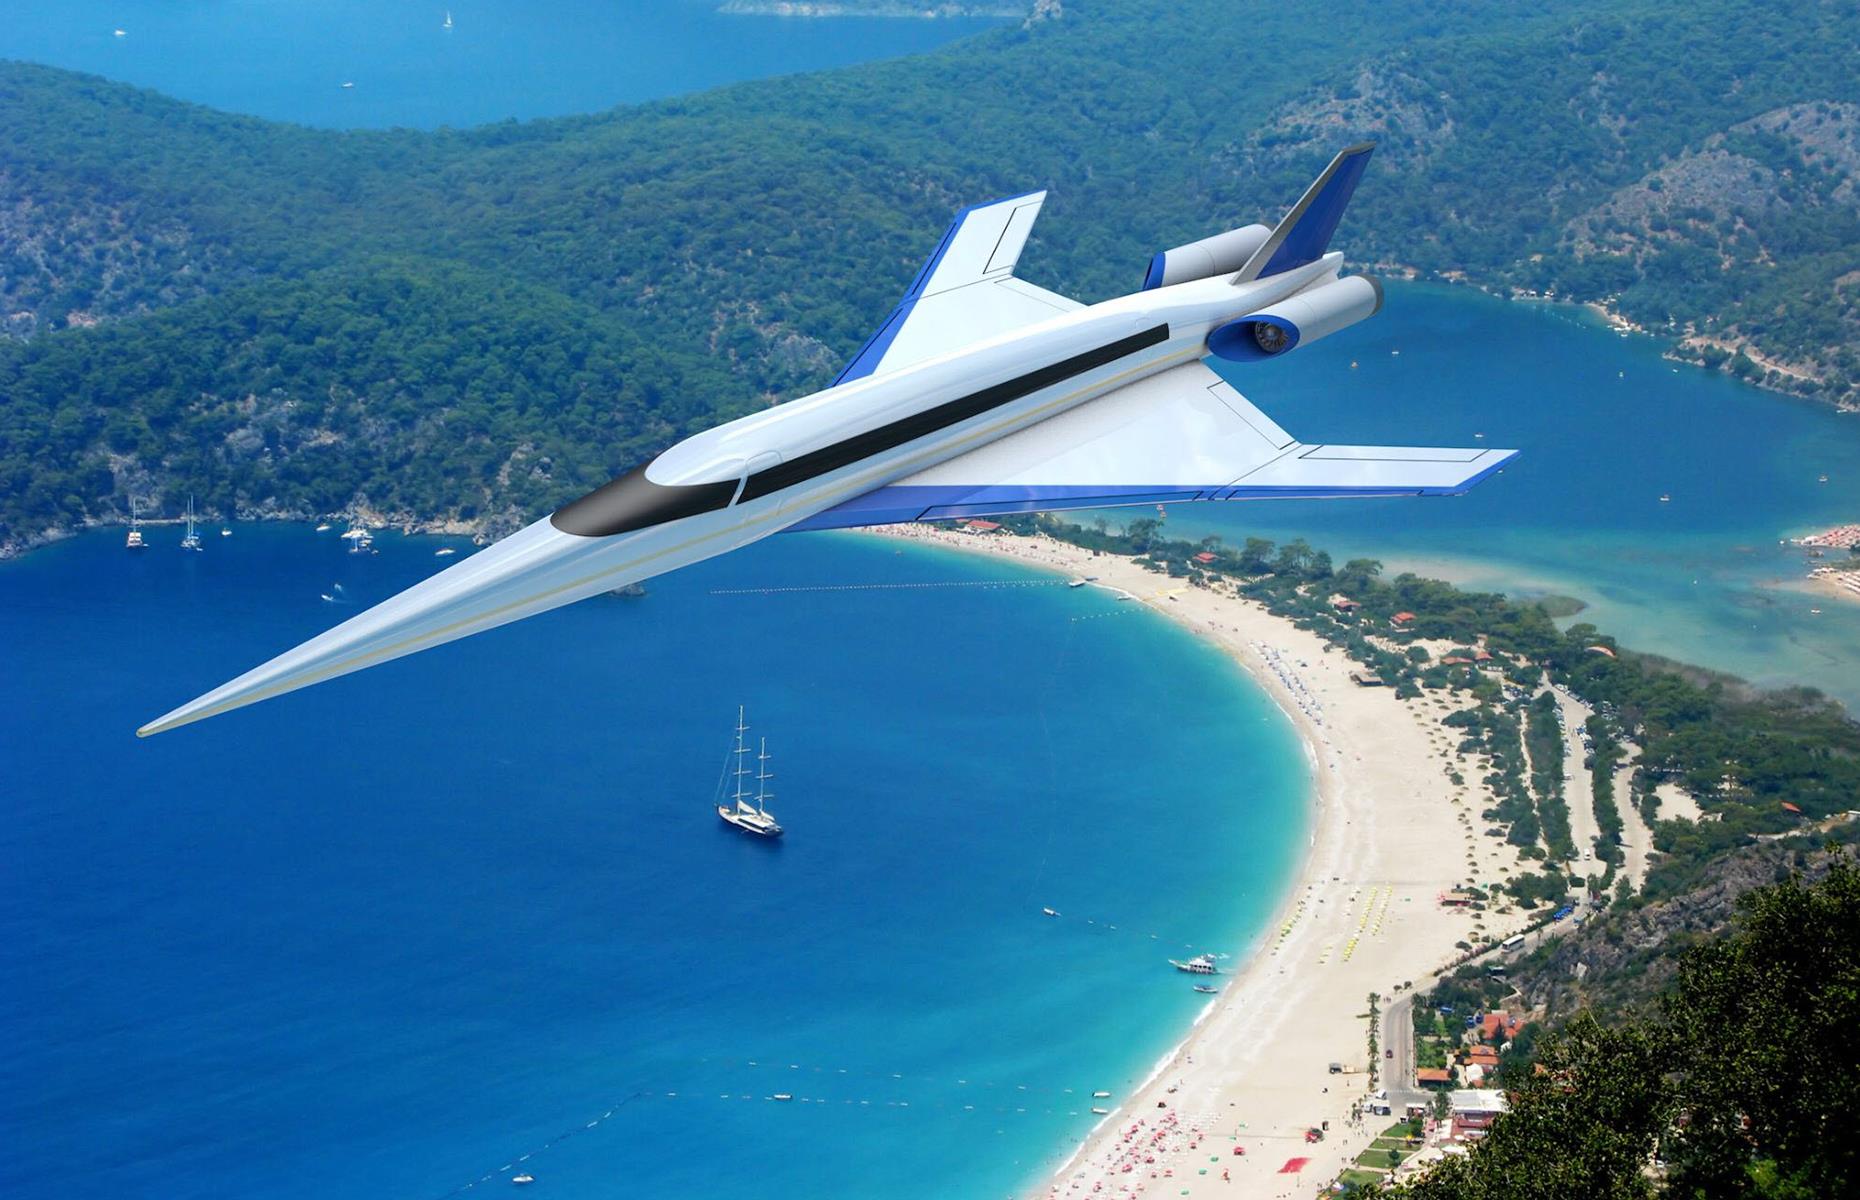 <p>Dreaming of a trip across the pond? A ground-breaking new supersonic jet could slash the time it’ll take passengers to hop across the Atlantic. The novel aircraft – Spike S-512 Quiet Supersonic Jet – is <a href="https://www.spikeaerospace.com/">pioneered by Spike Aerospace</a> and could eventually see travelers reach New York from London in as little as 1.5 hours. </p>